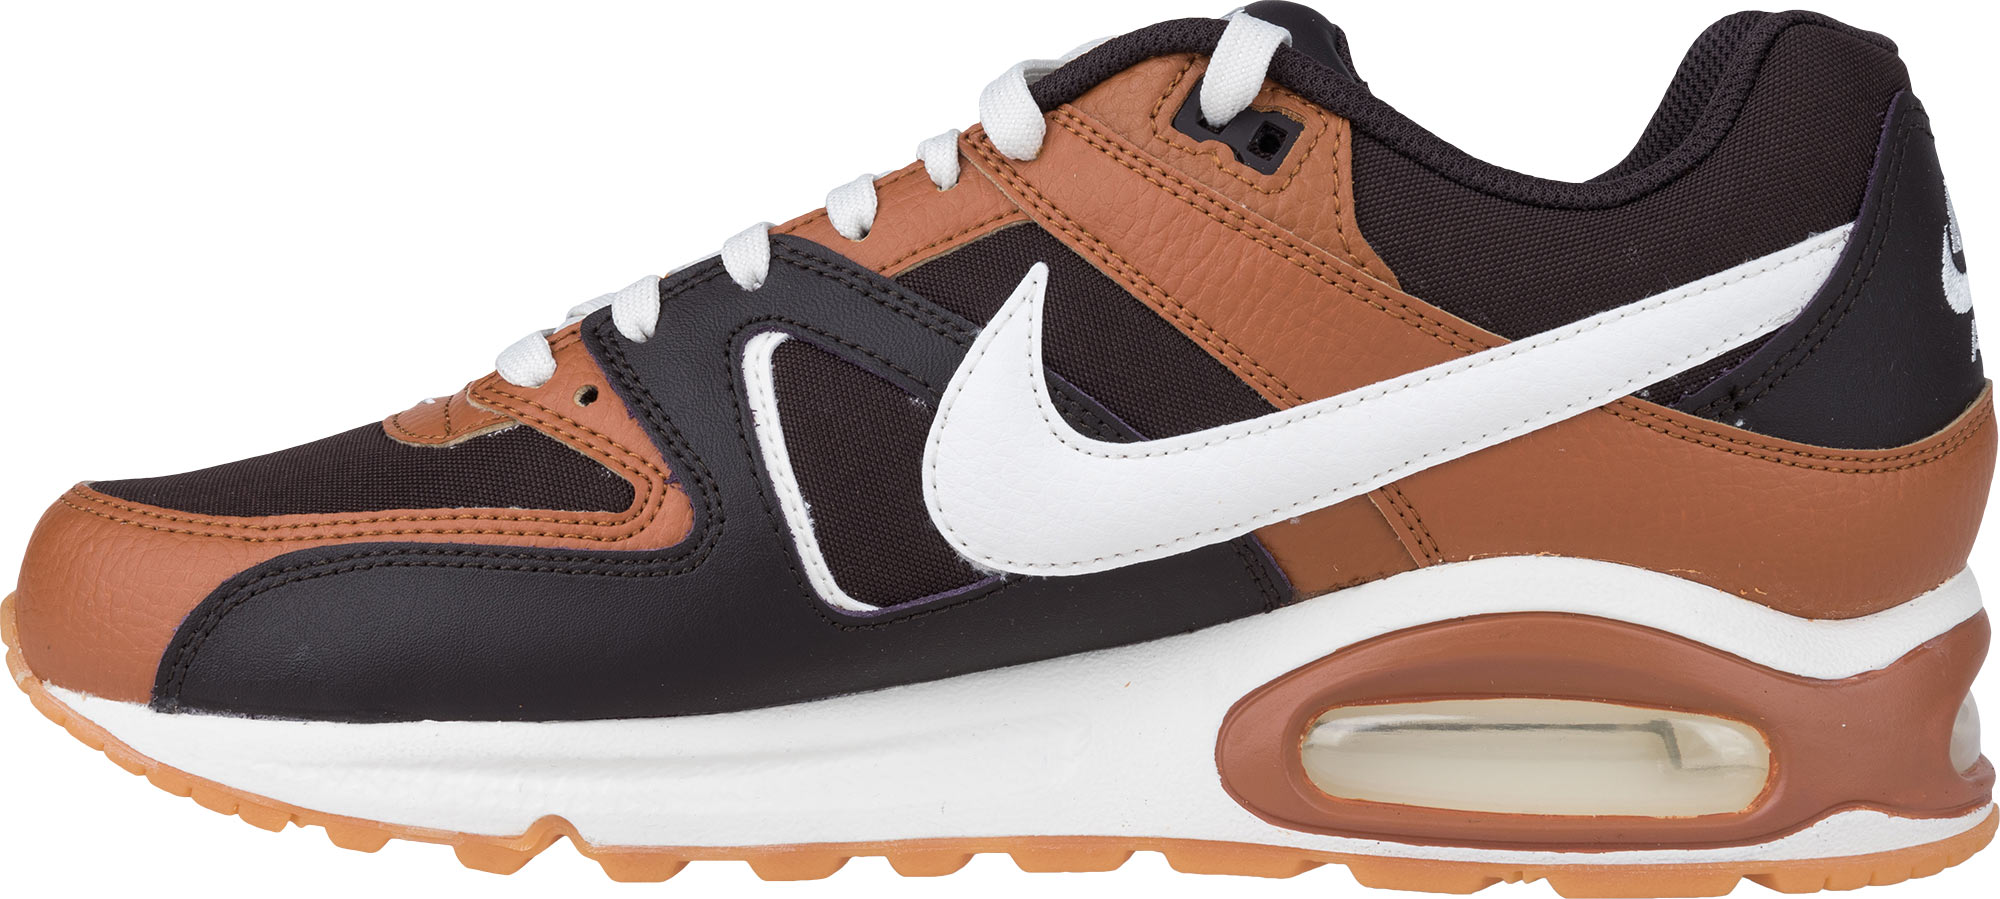 Beschrijving defect Ramkoers Nike AIR MAX COMMAND LEATHER | sportisimo.com